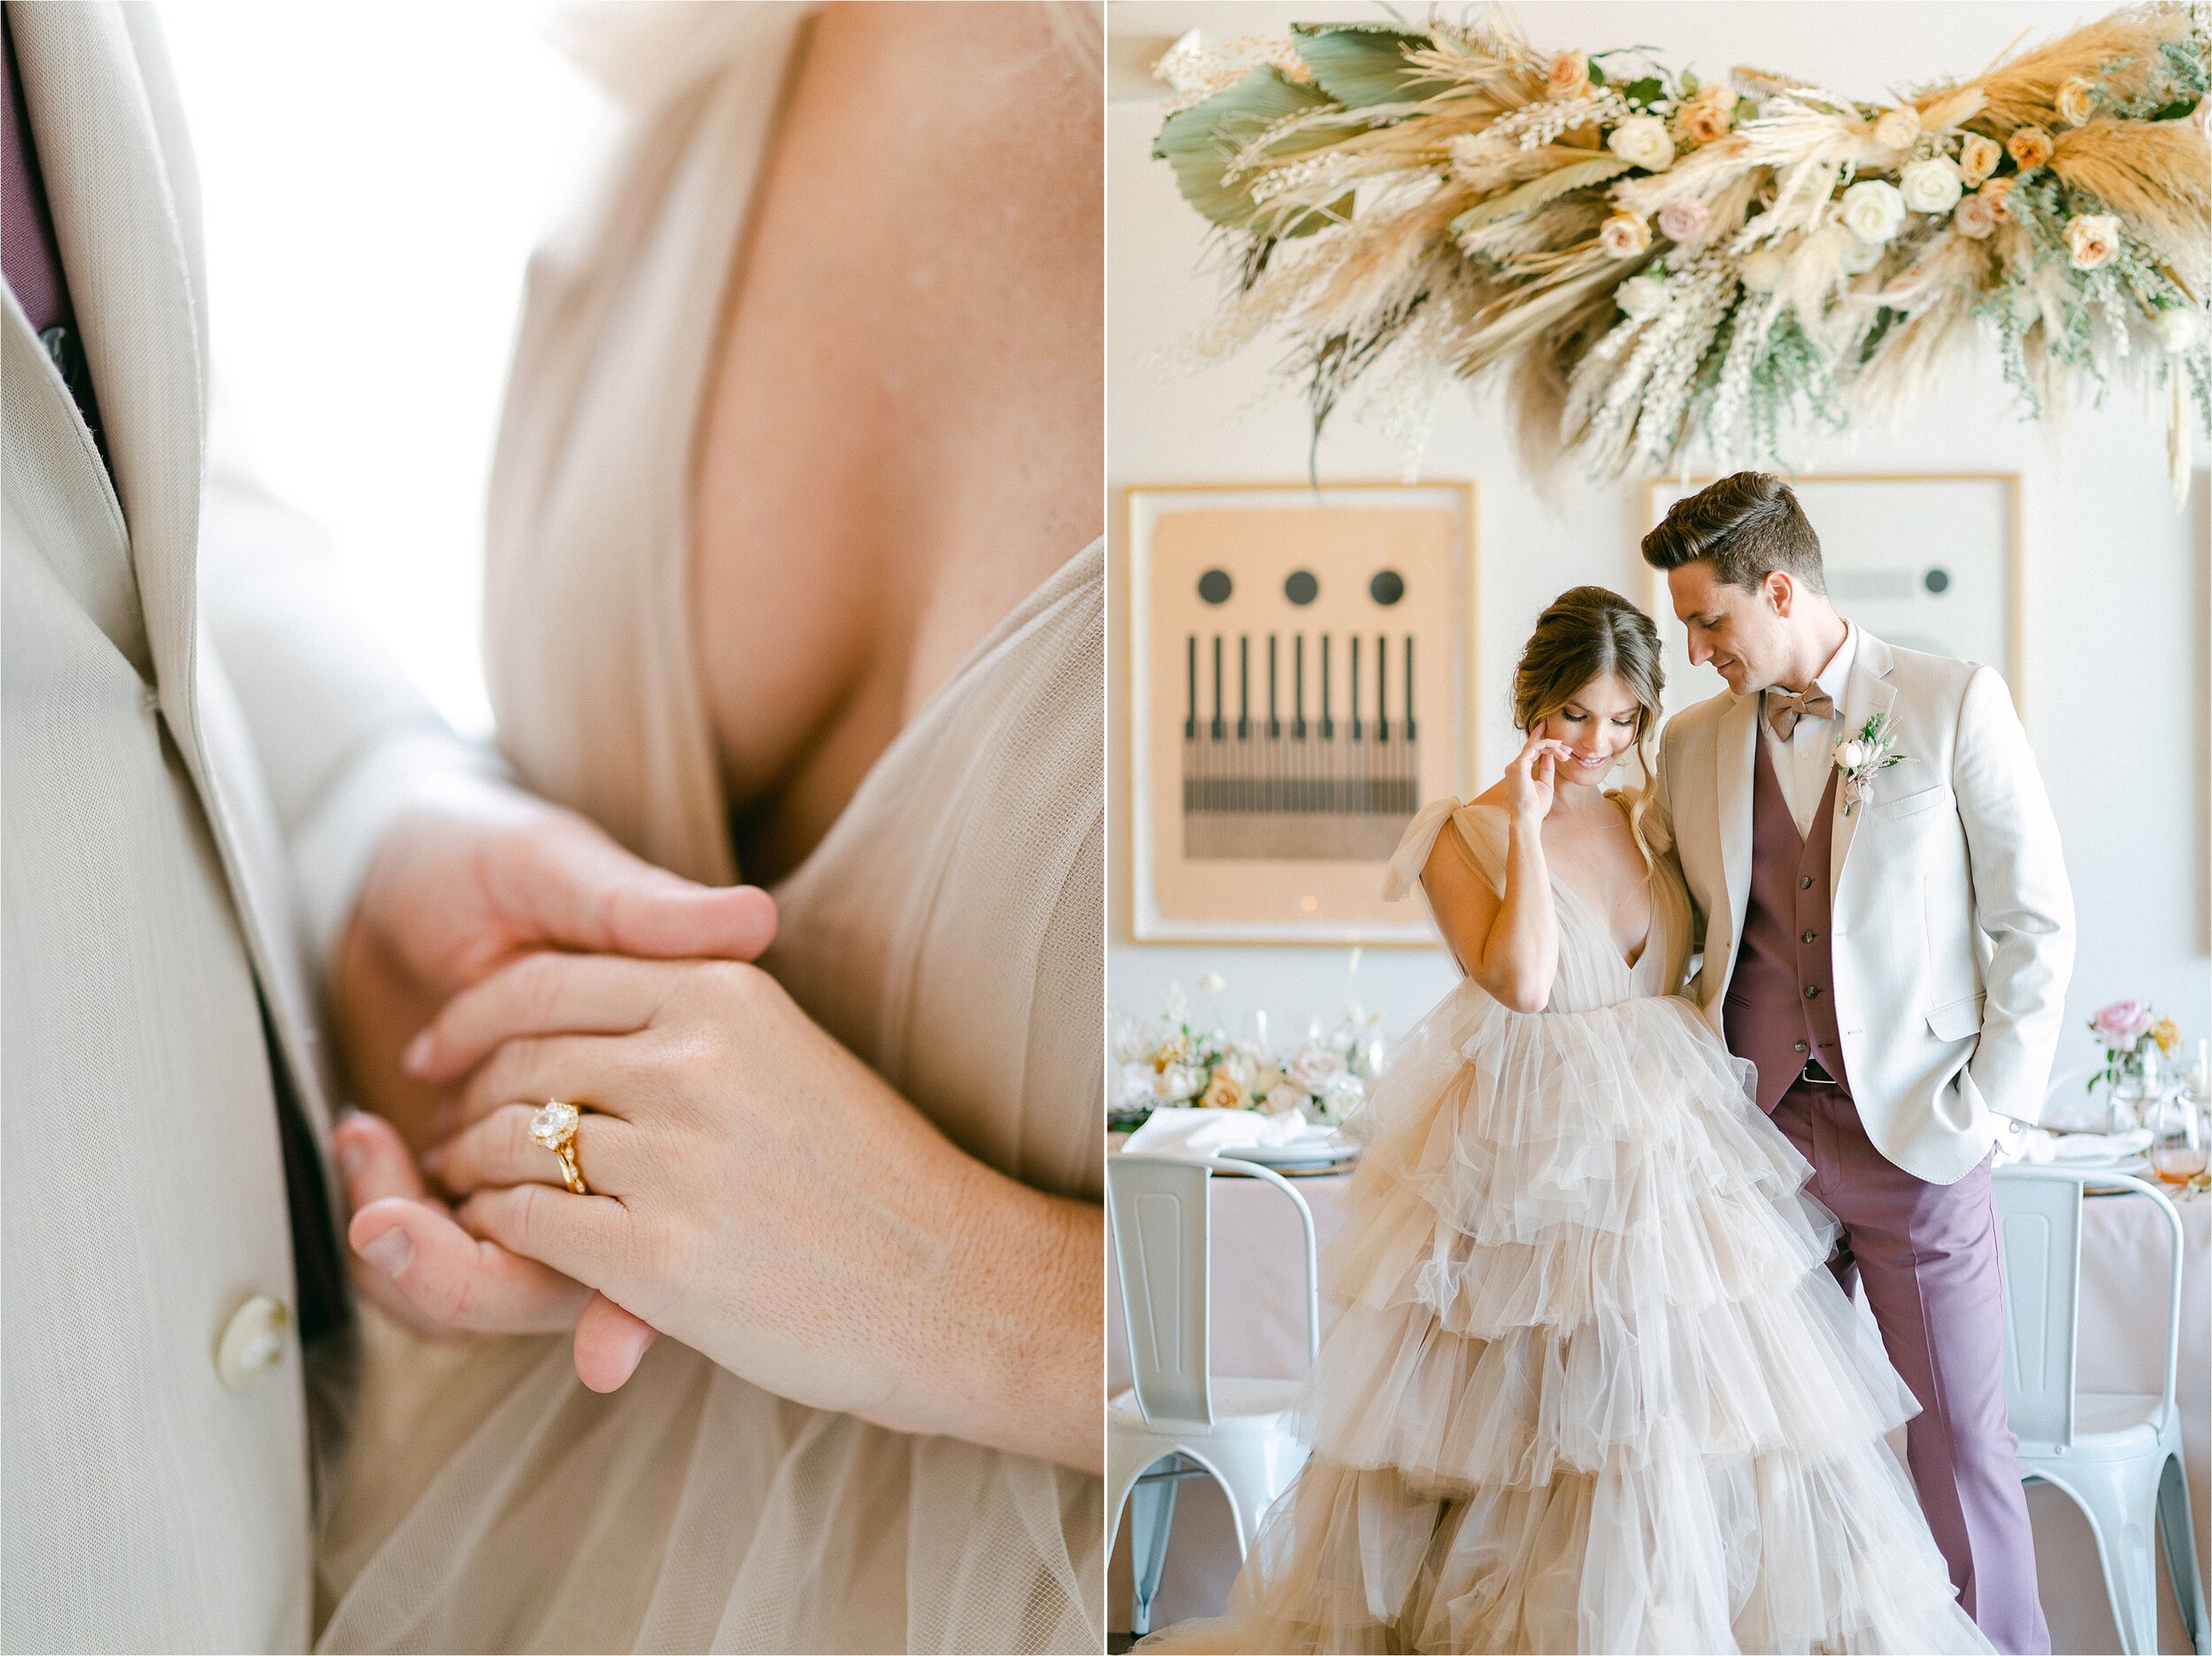 Nude colored micro wedding featuring a hanging floral feature over the reception table with both live and dried florals.  The bride and groom are standing in front of the table.  She is wearing a nude colored, layered tulle ball gown and he is wearing brown pants, vest and bow tie with a cream suit jacket